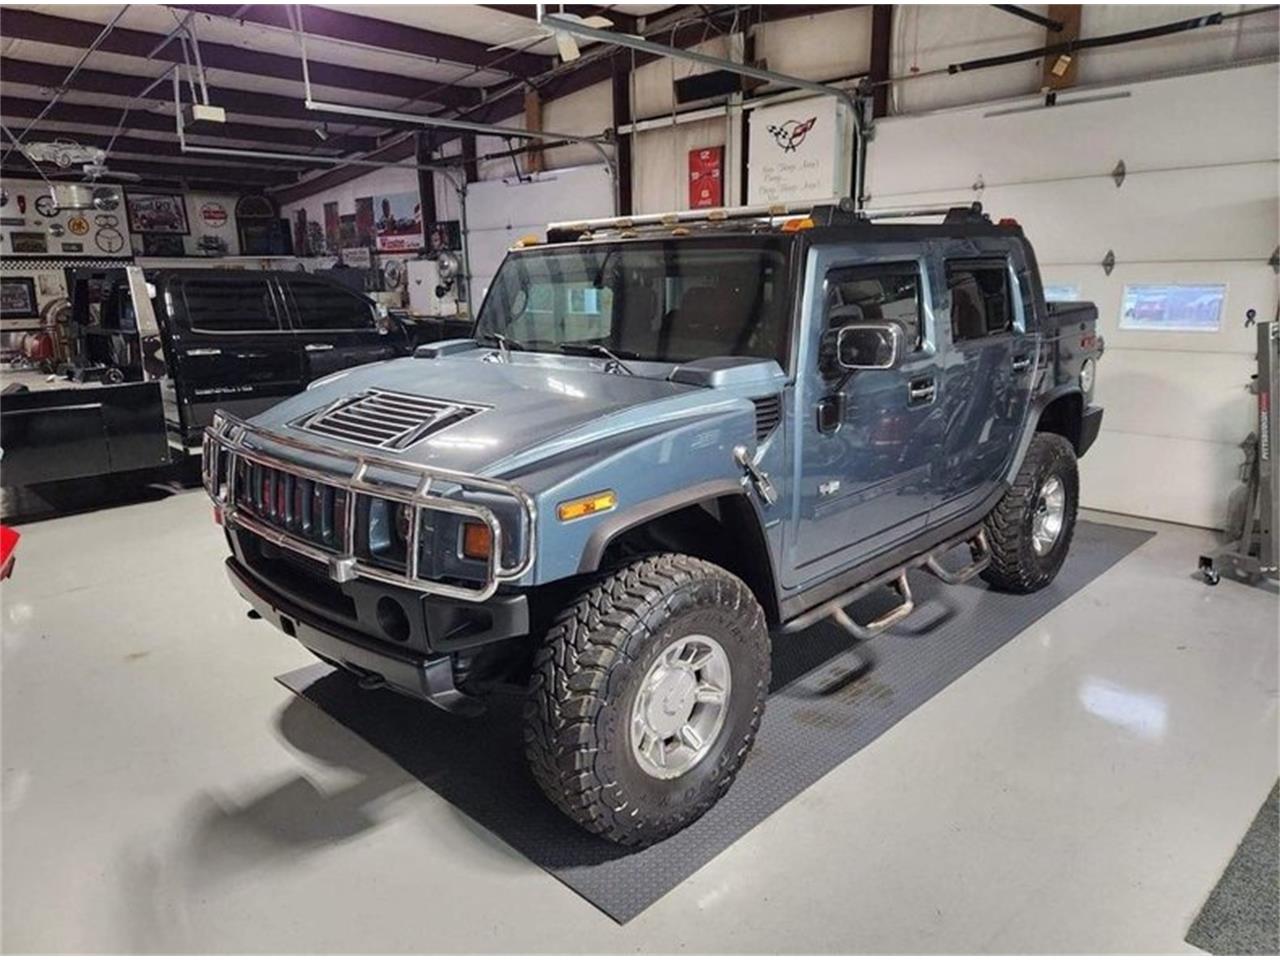 For Sale at Auction: 2005 Hummer H2 in Greensboro, North Carolina for sale in Greensboro, NC